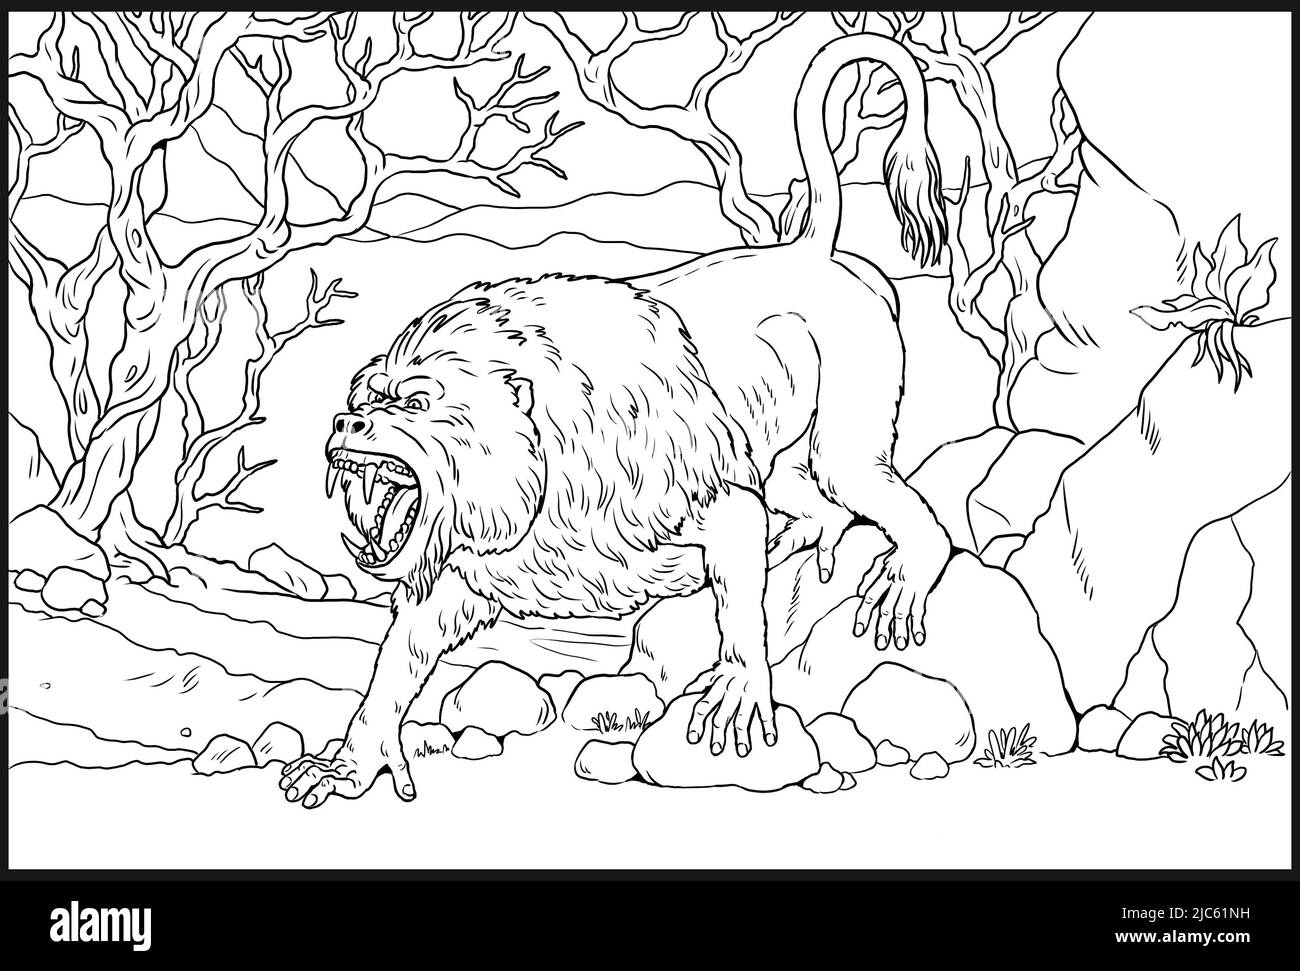 Prehistoric primates - dinopithecus. Monster baboon. Ancestors of humans for coloring book. Stock Photo